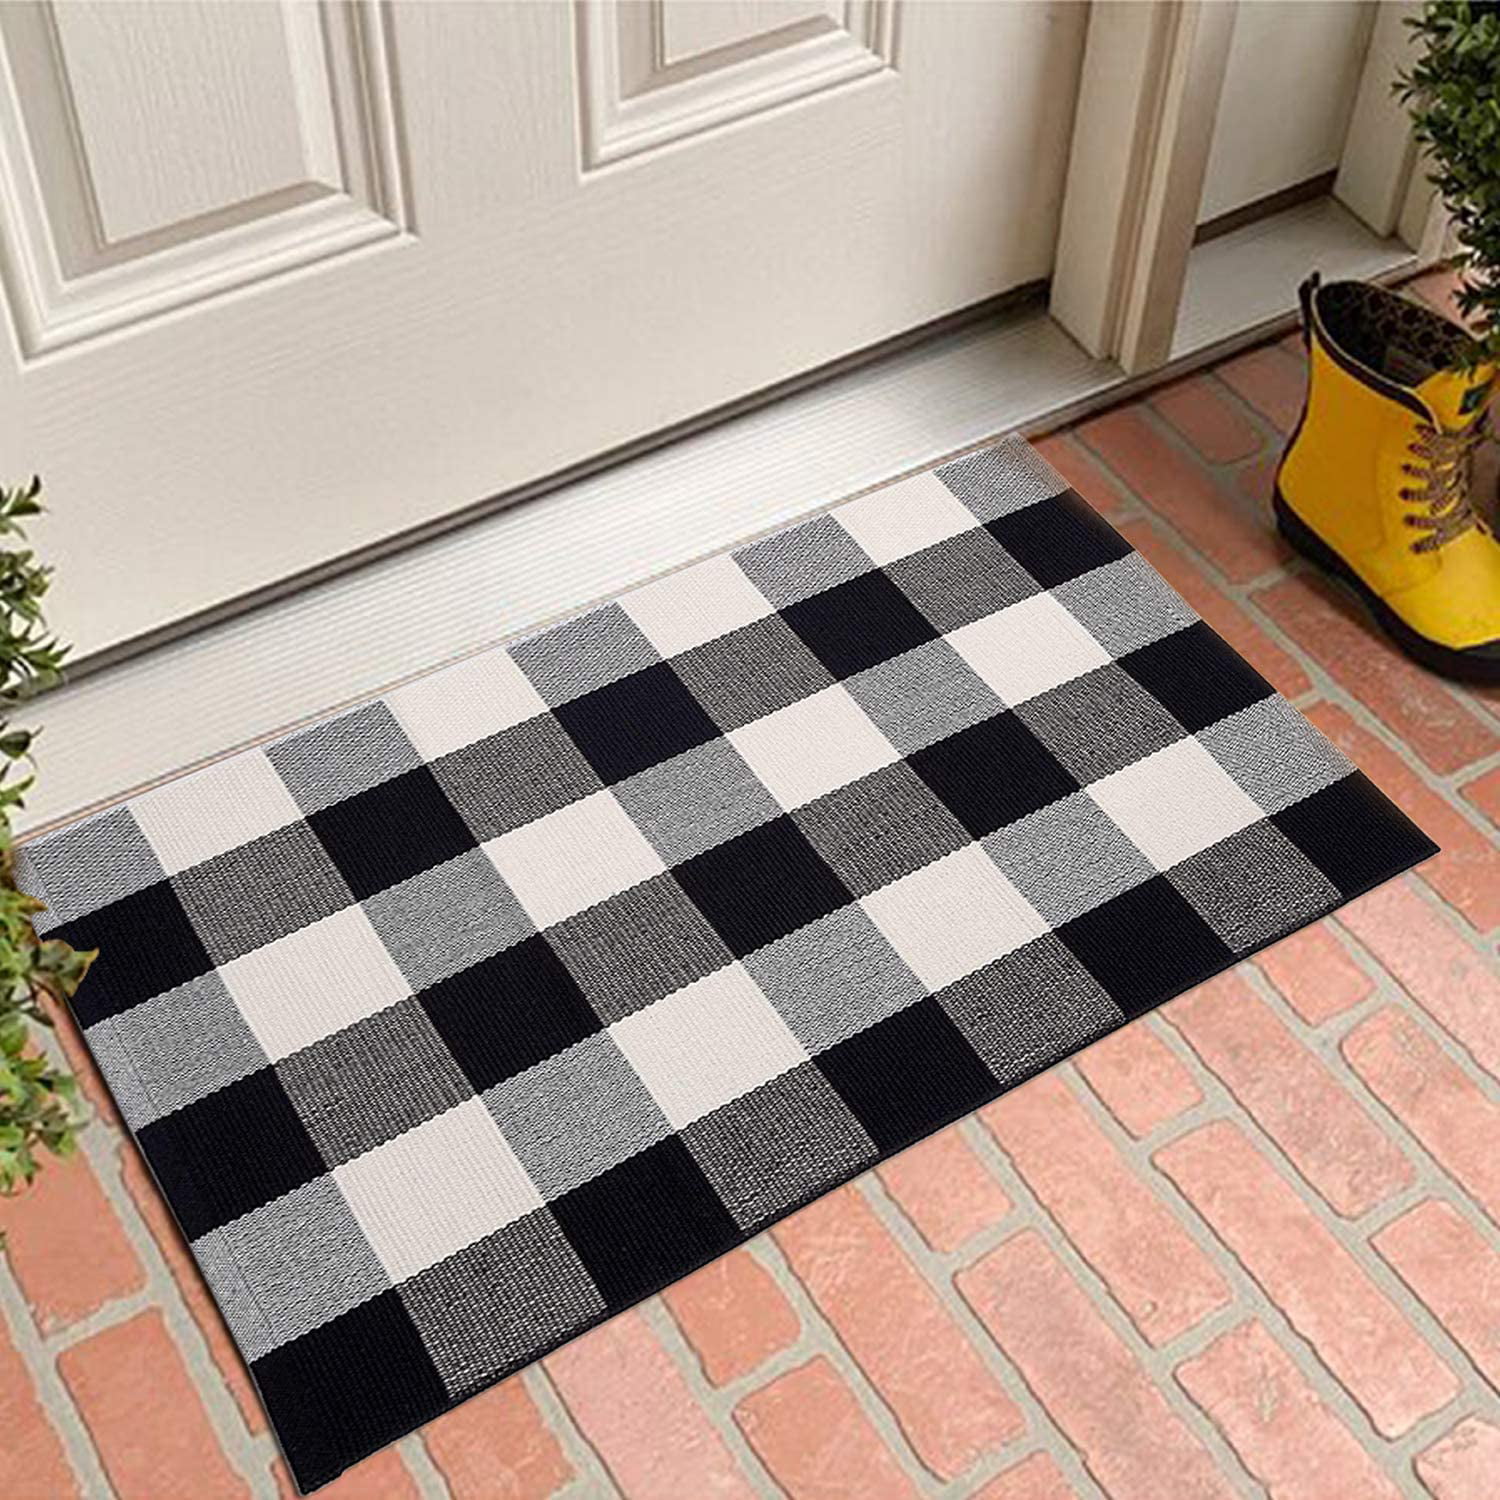 Buffalo Plaid Outdoor Area Rug 3x5 ft LEEVAN Black and White Outdoor Patio Rug Hand-Woven Checkered Welcome Door Mat for Porch//Farmhouse//Layered//Living Room